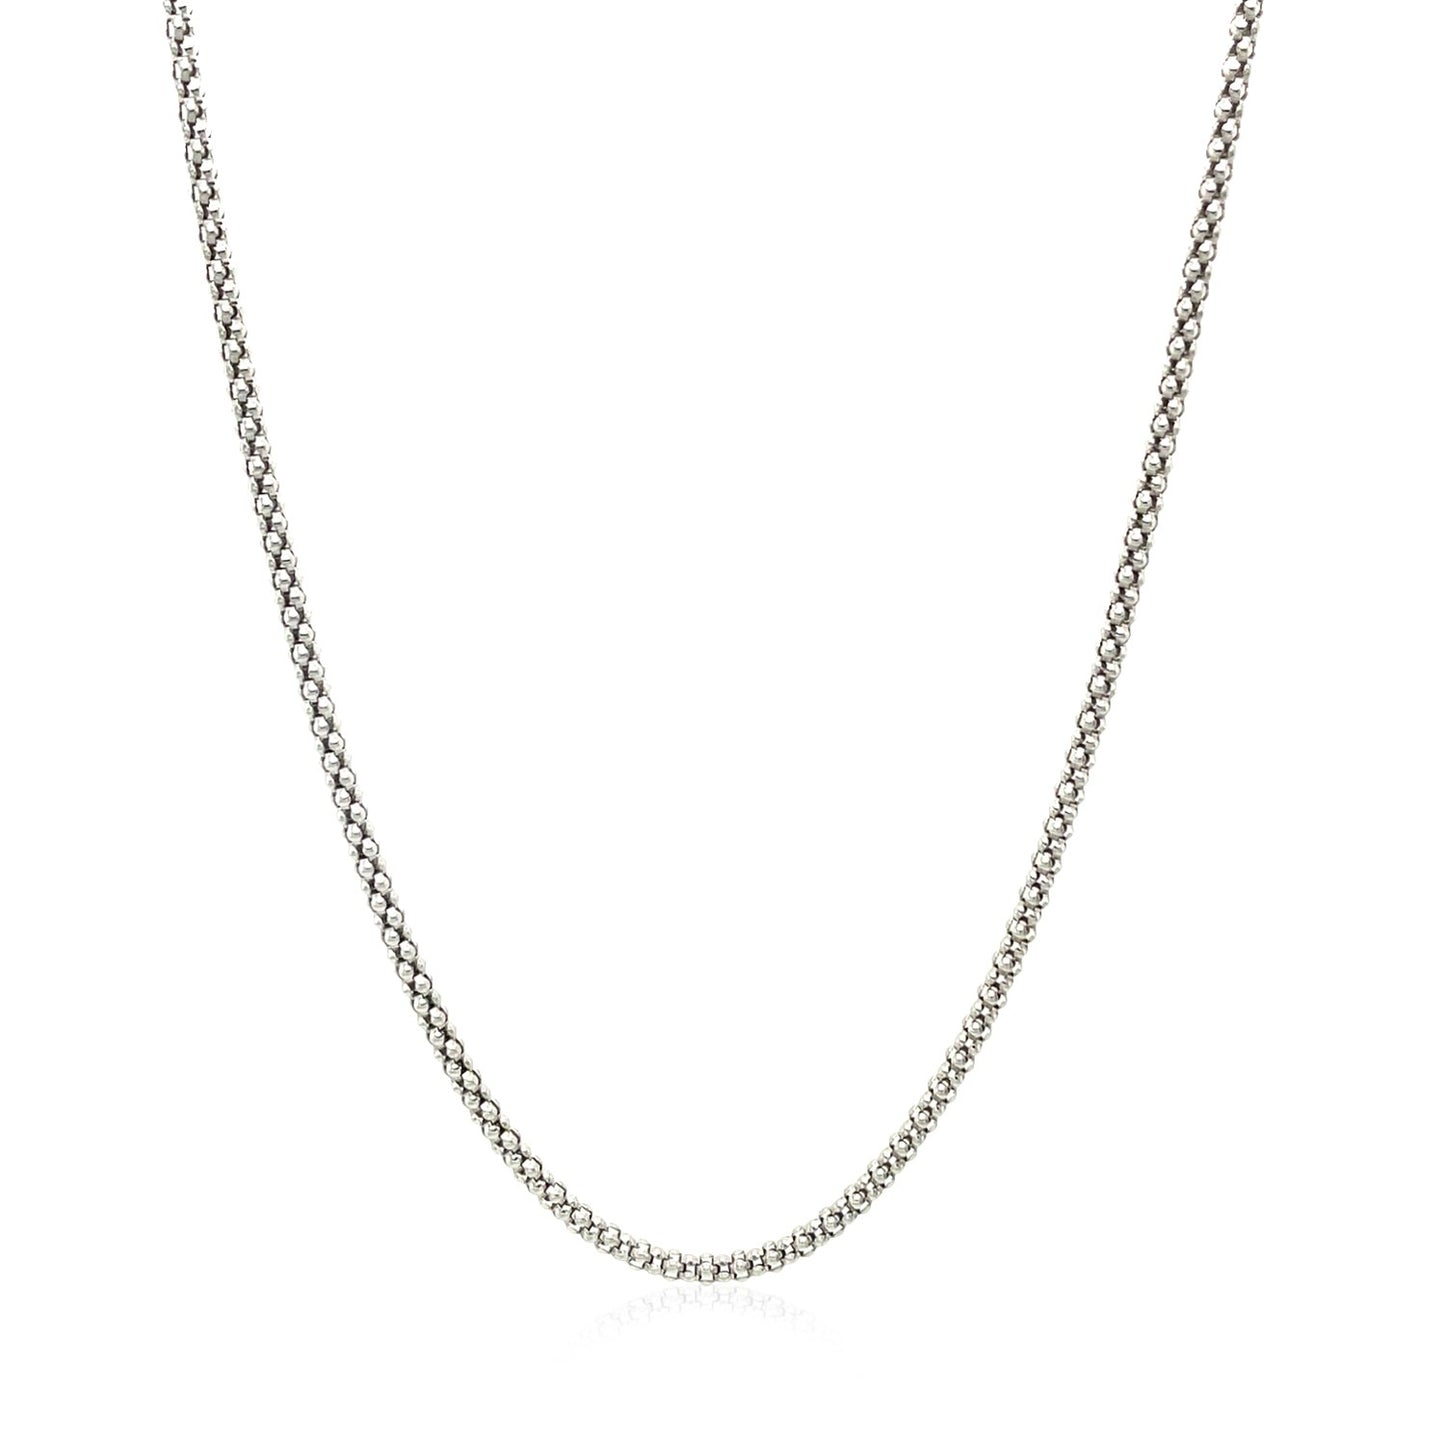 Rhodium Plated 1.8mm Sterling Silver Popcorn Style Chain